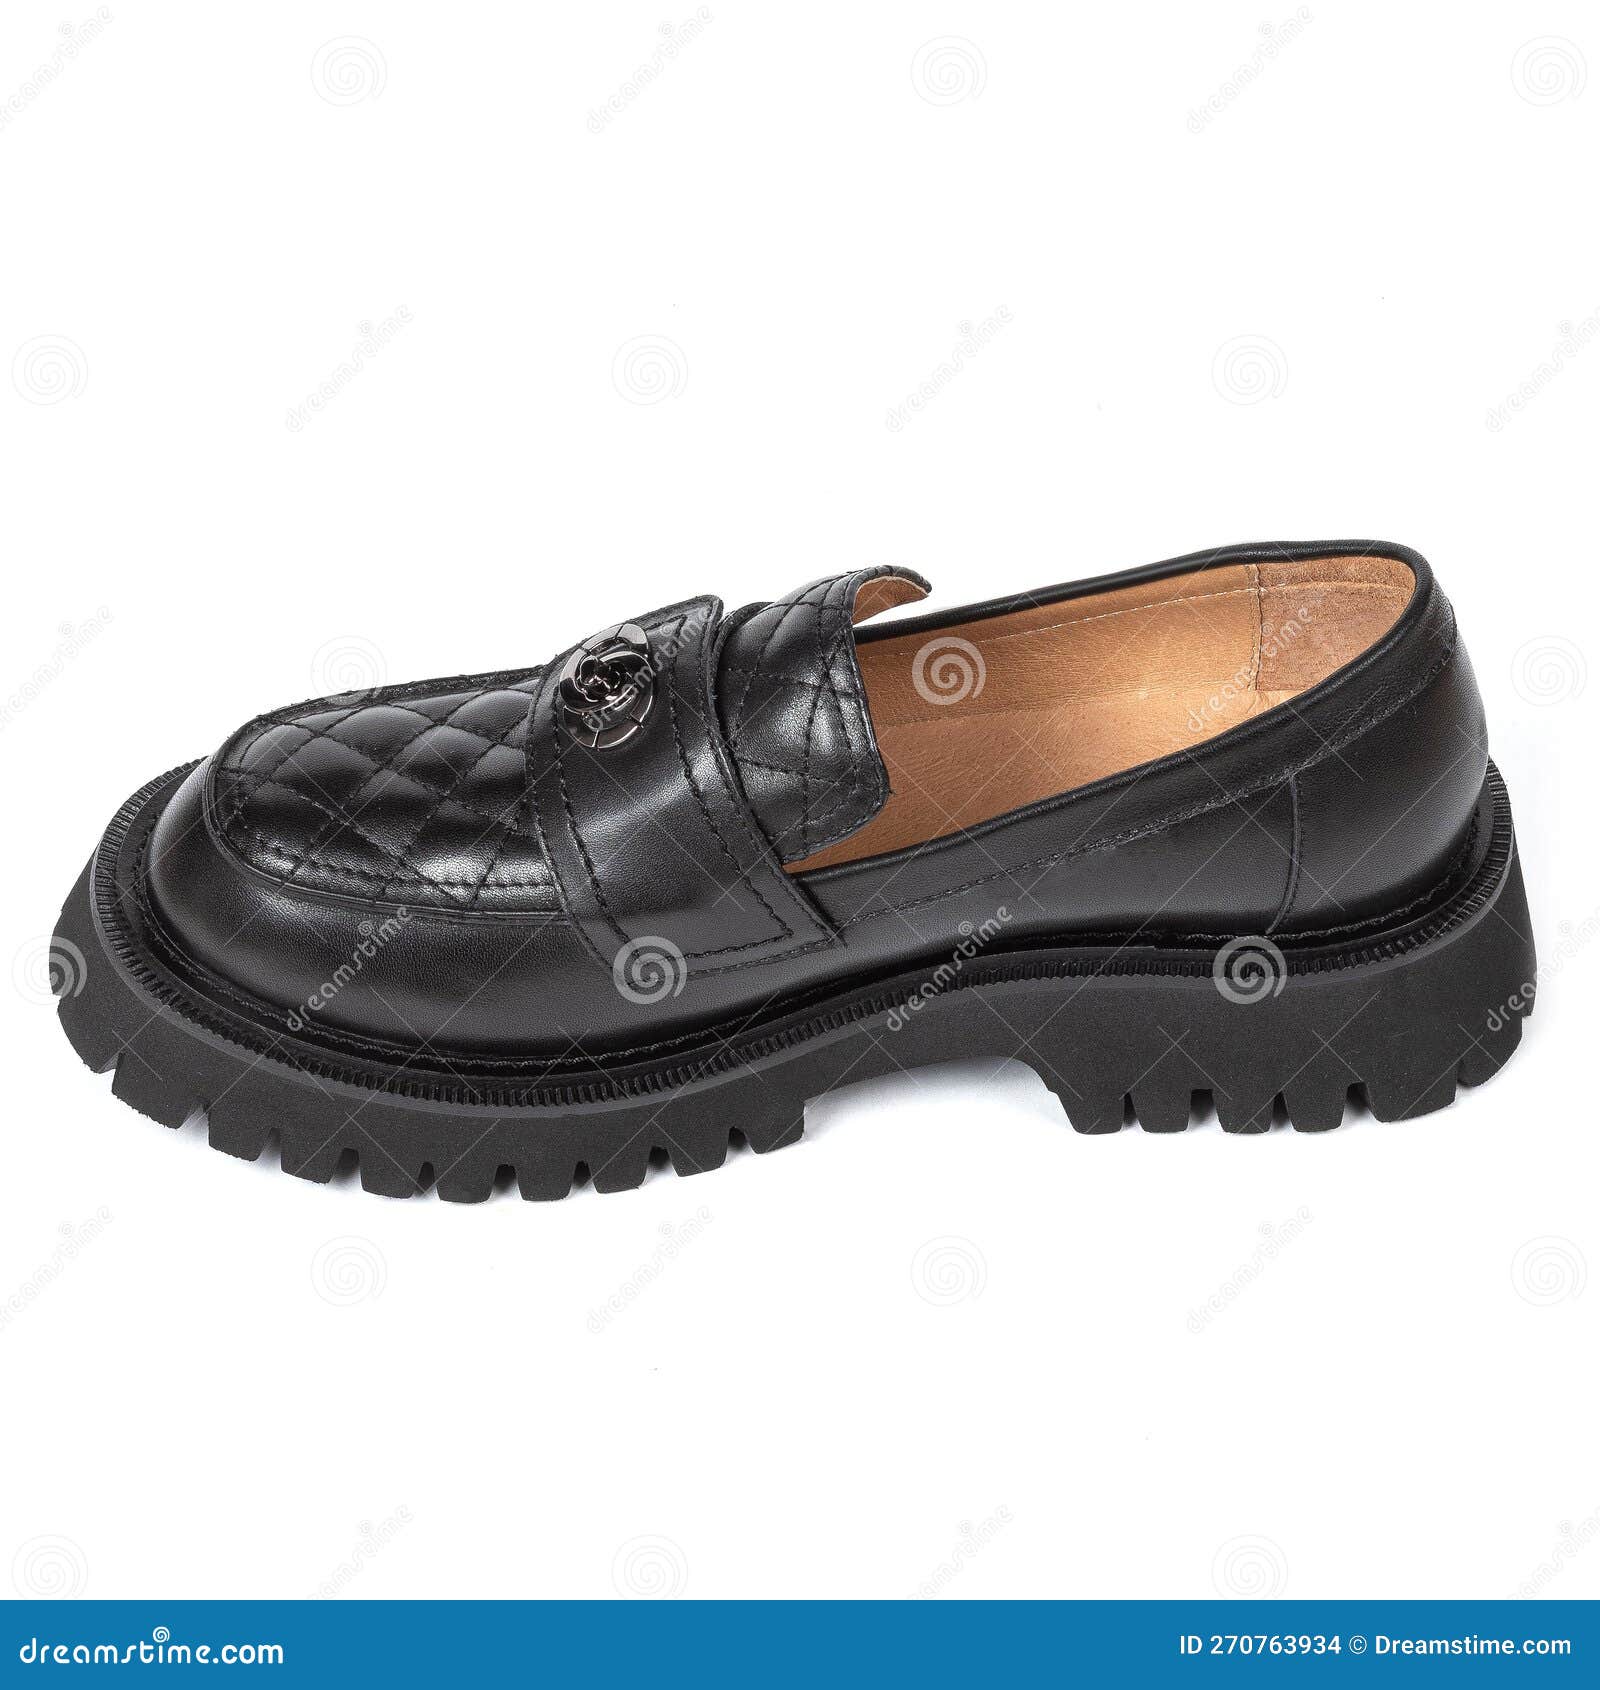 QUALITY LEATHER GROOMS SHOES Black varnished leather formal shoes